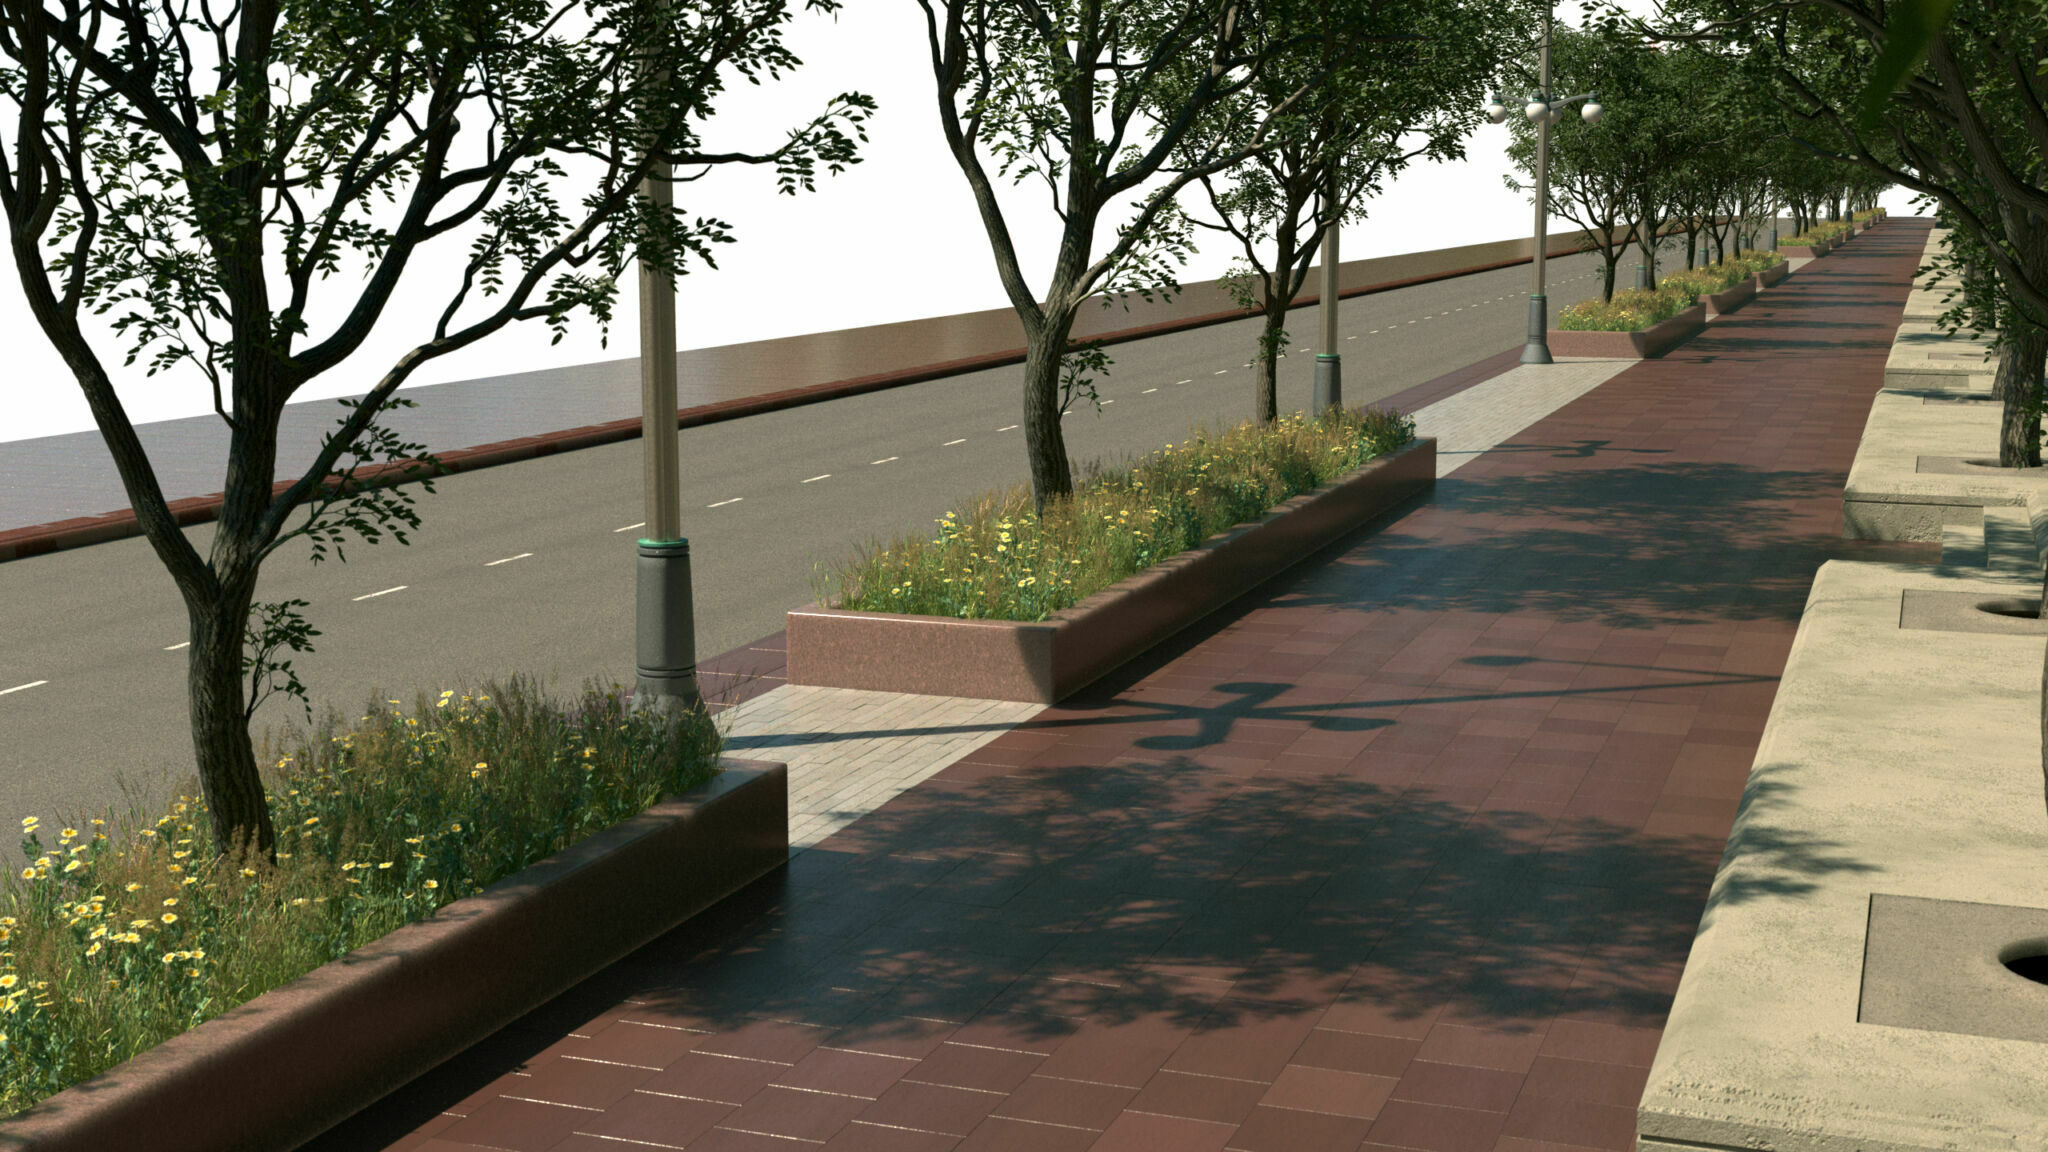 Rendering of the new Confederation Boulevard pathway